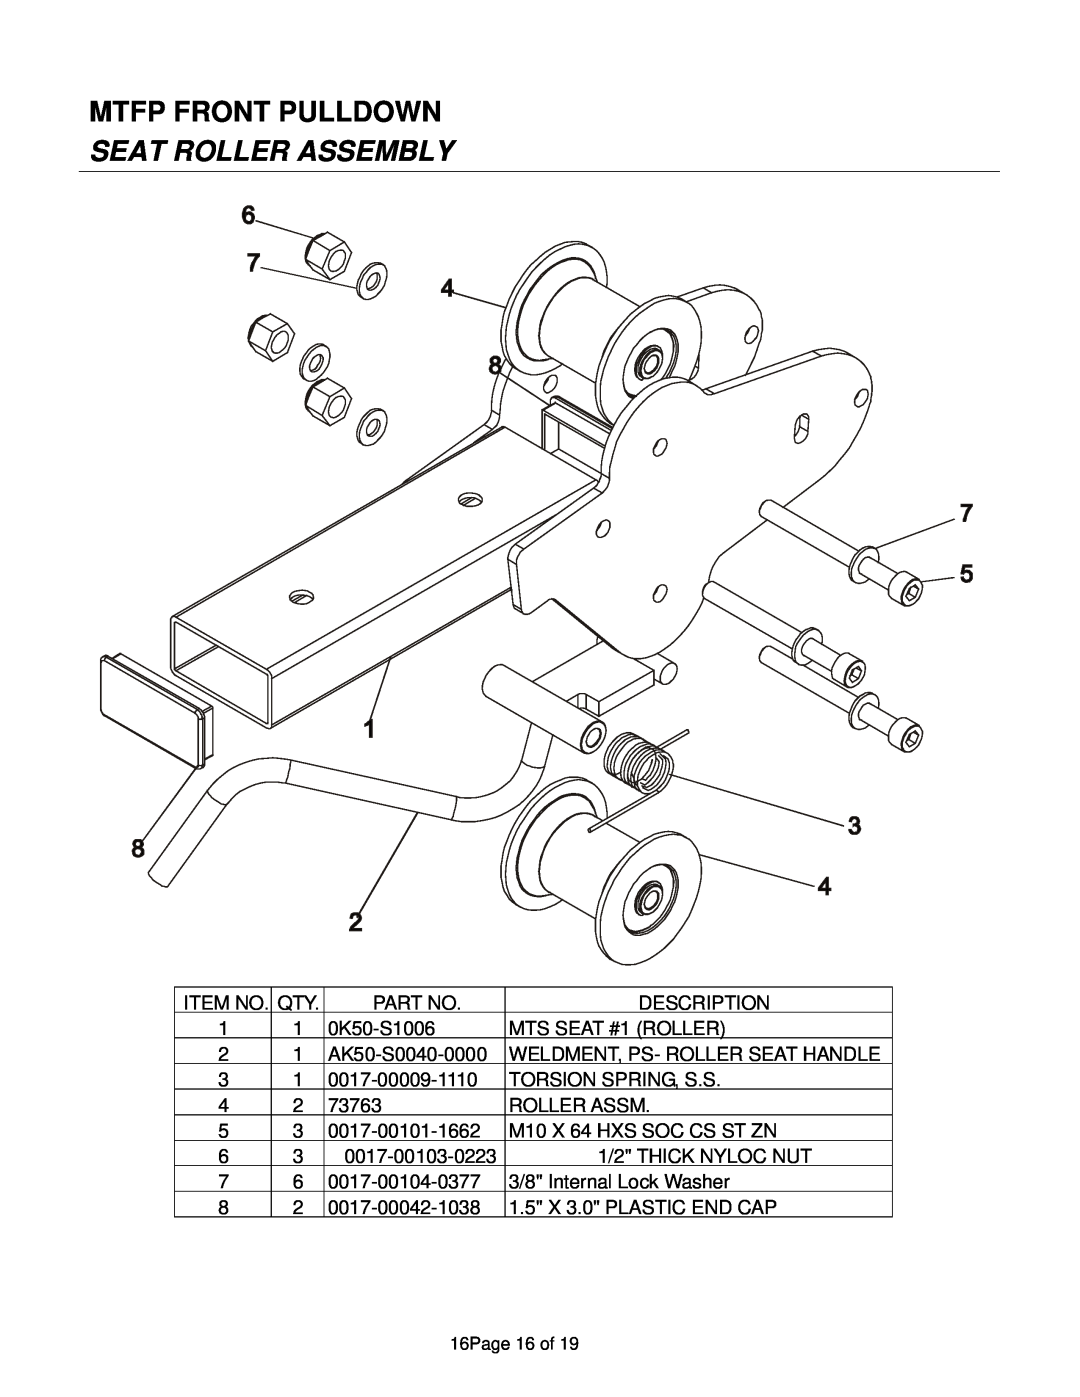 Life Fitness MTFP manual Seat Roller Assembly, Mtfp Front Pulldown 